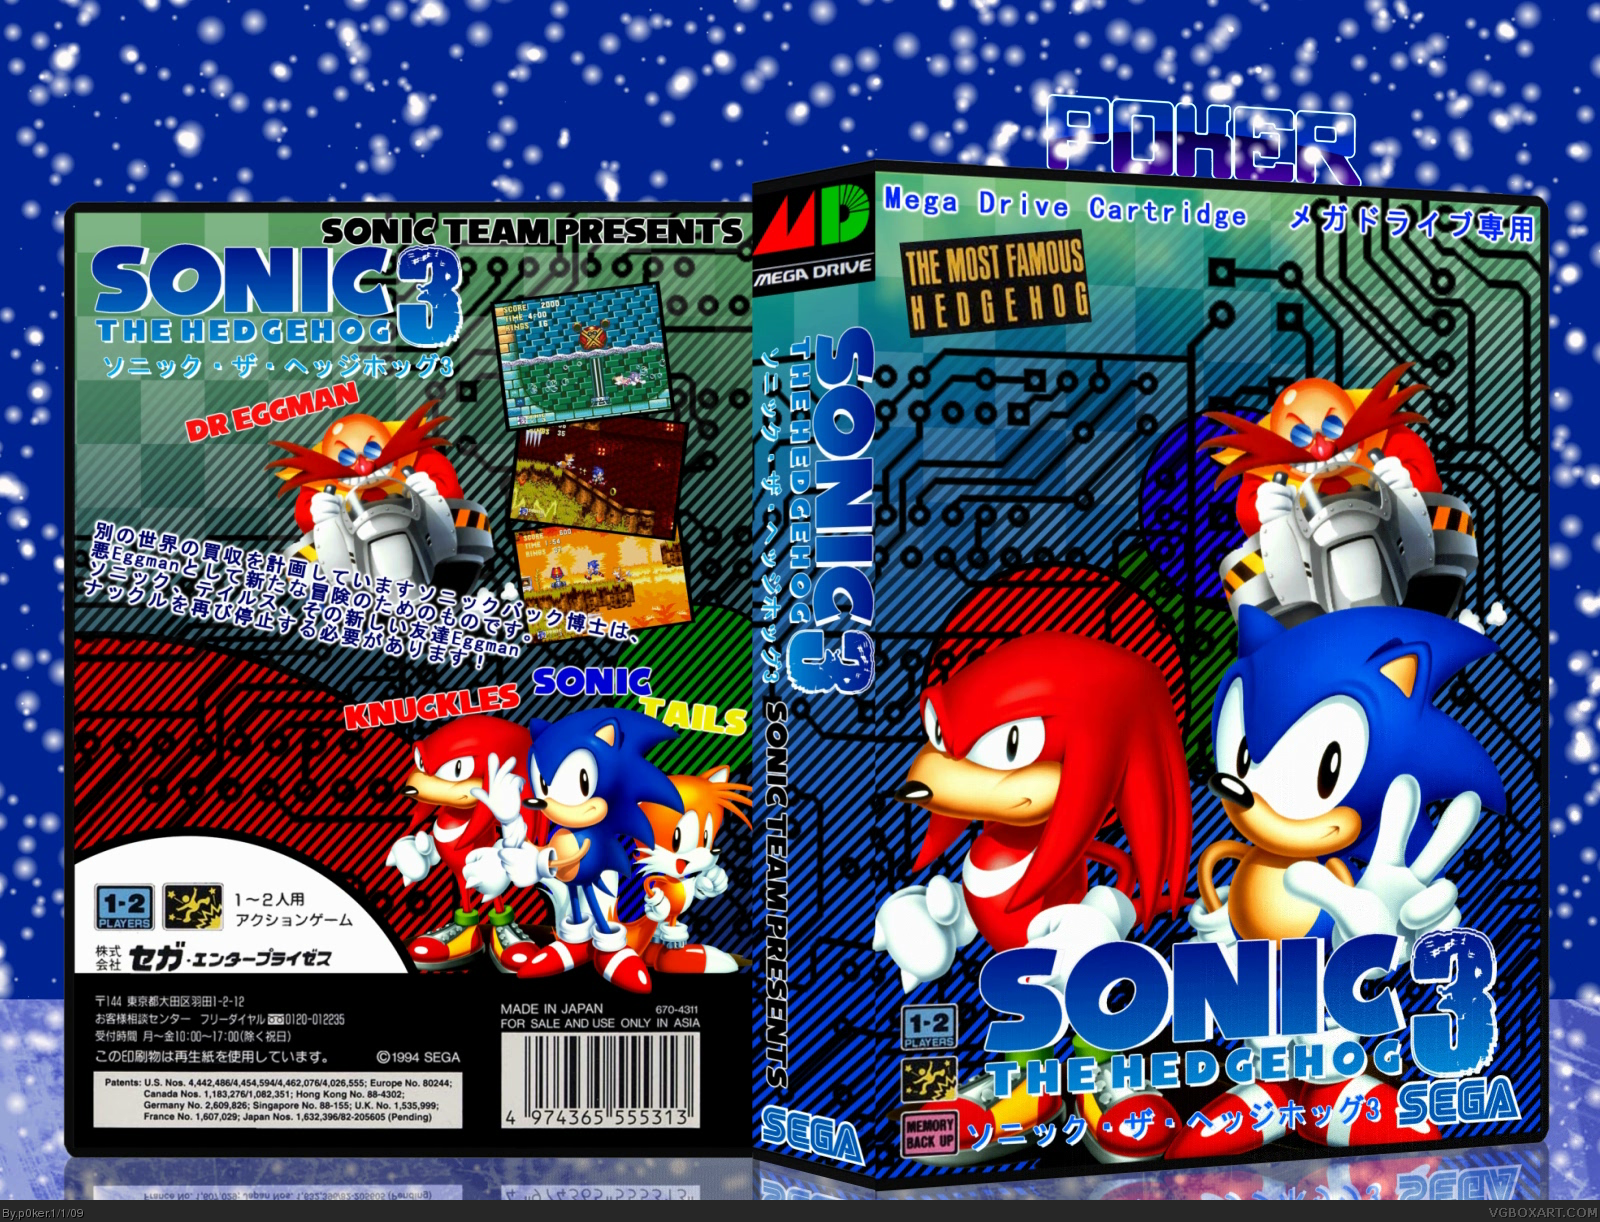 Sonic the Hedgehog 3 box cover